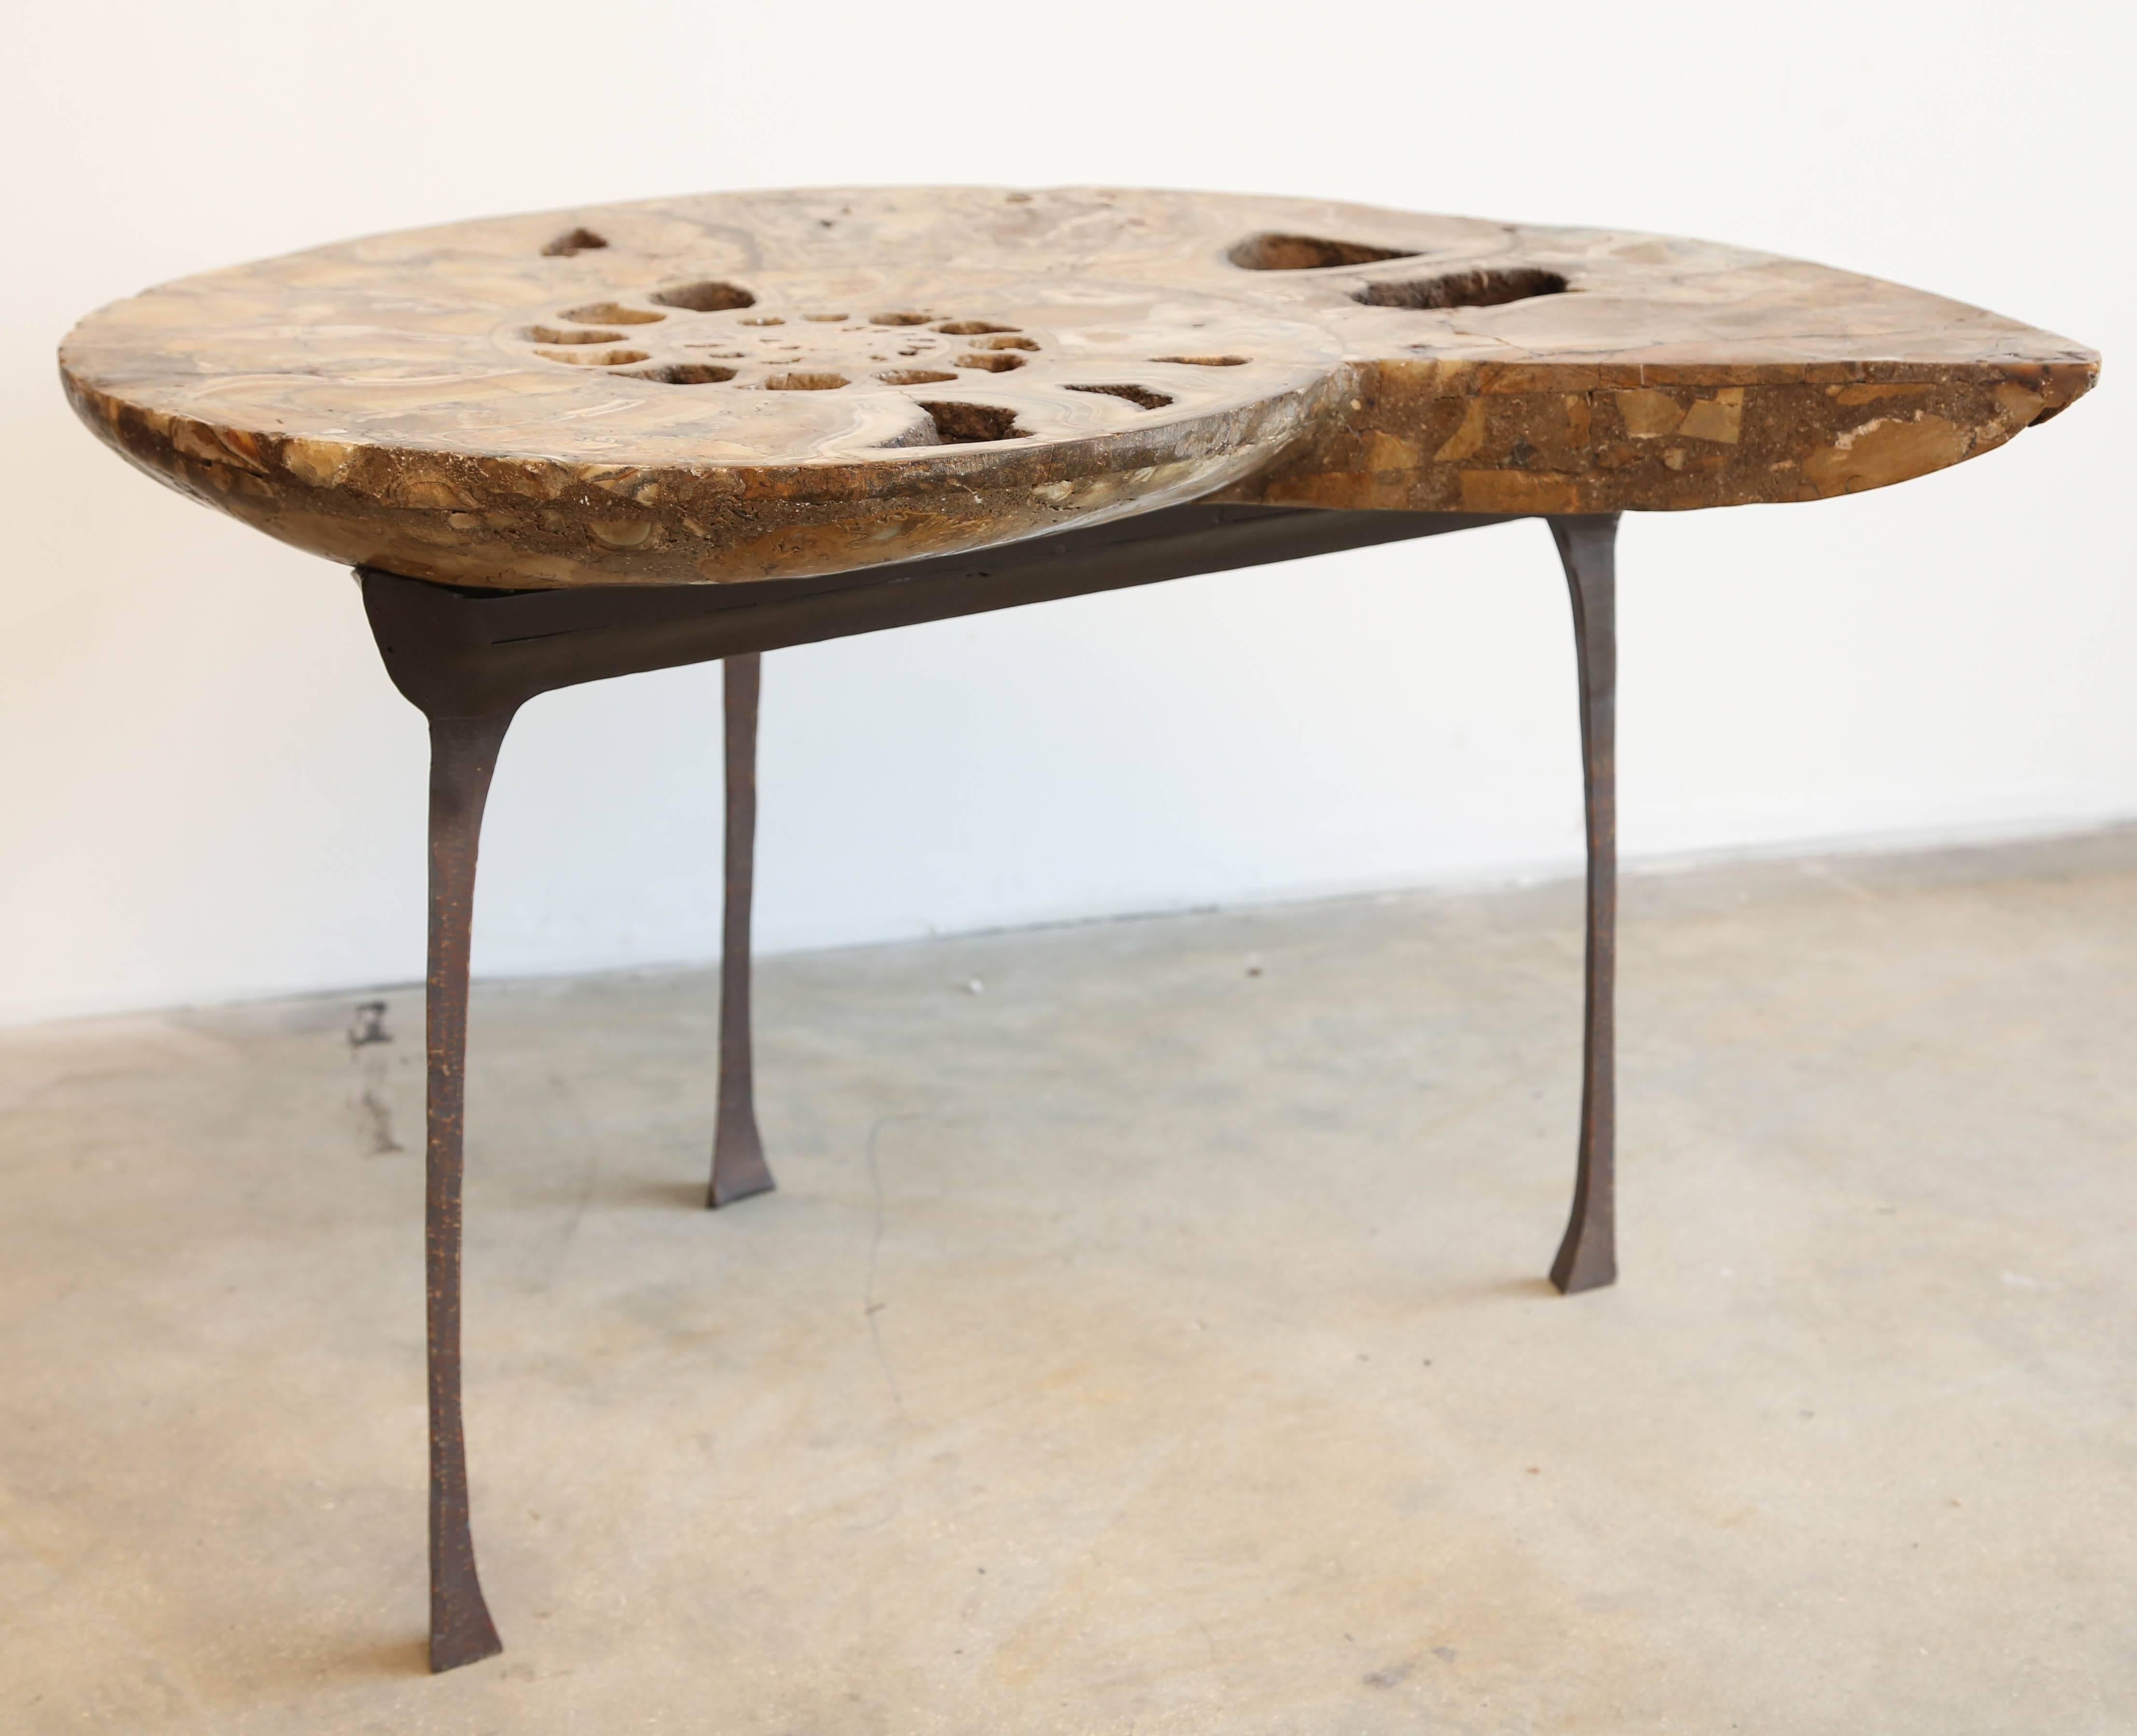 Stone Coffee or Sofa Table a Fossil of Ammonite Standing on a Bronze Base